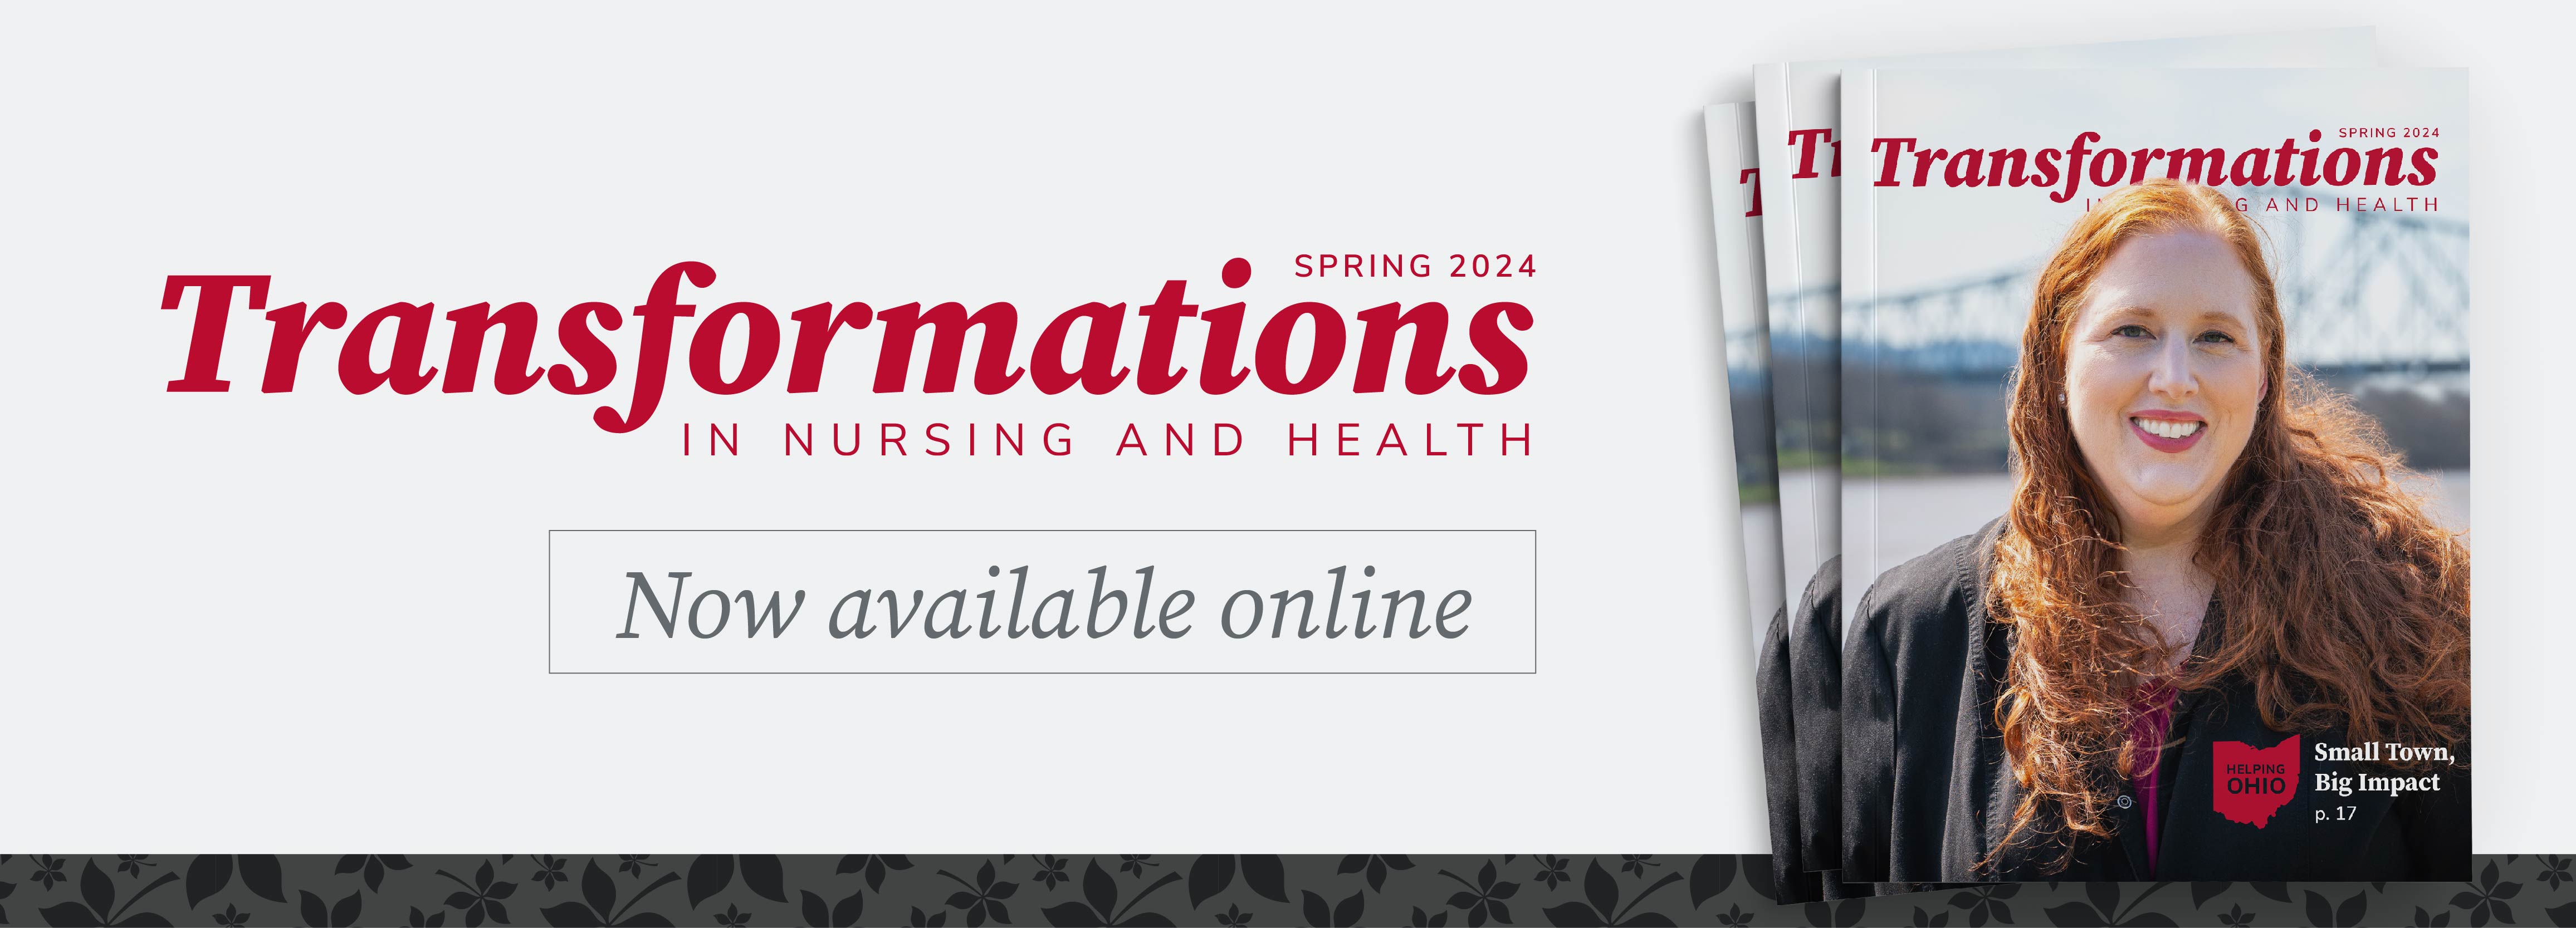 Spring 2024 Transformations in Nursing and Health